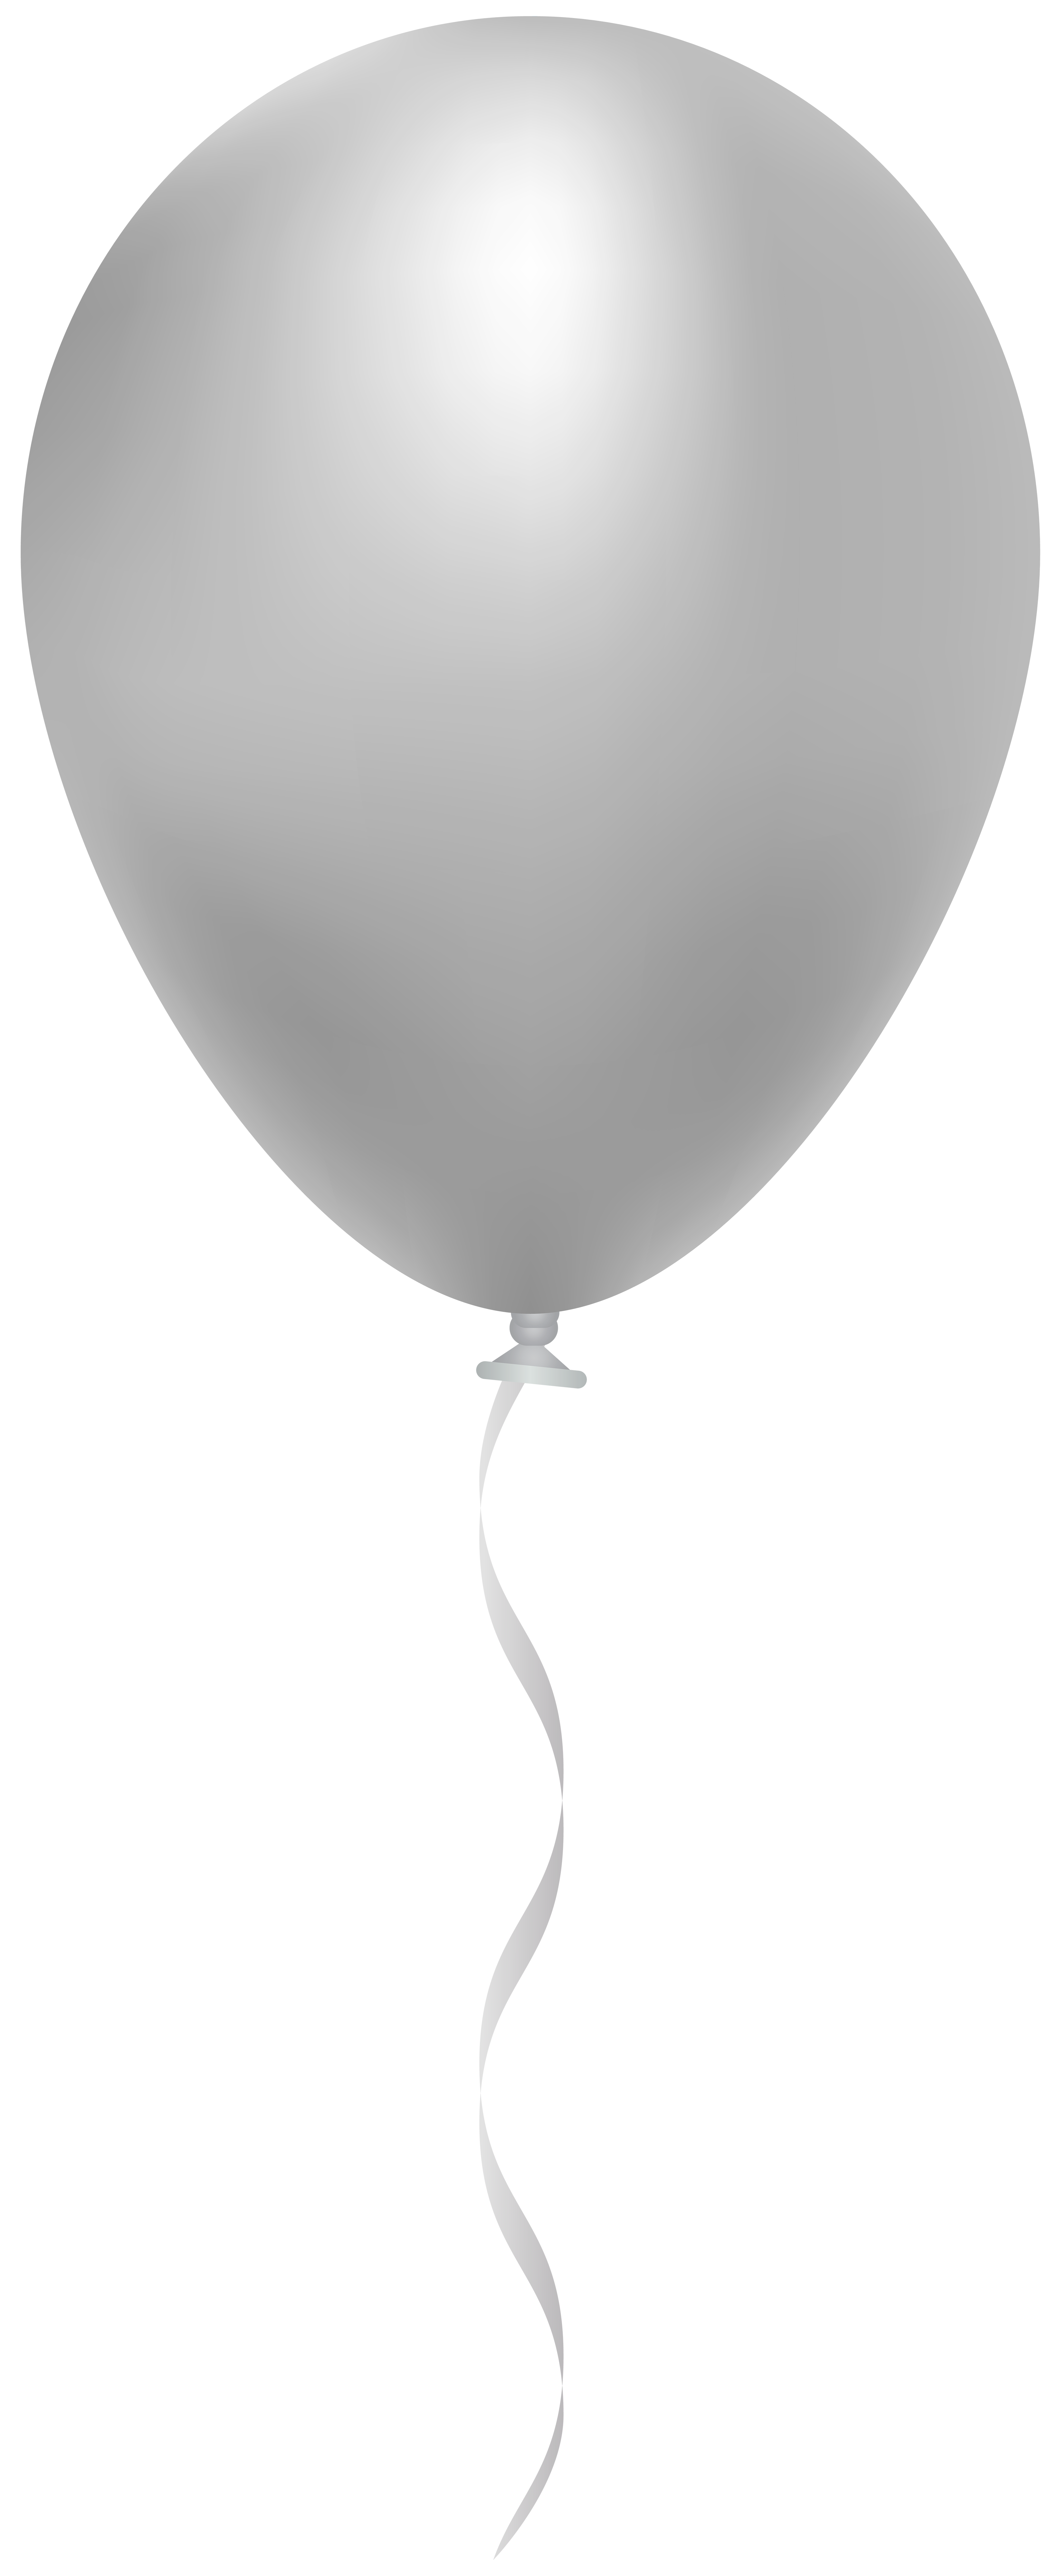 White Balloon PNG Clip Art Image | Gallery Yopriceville - High-Quality ...